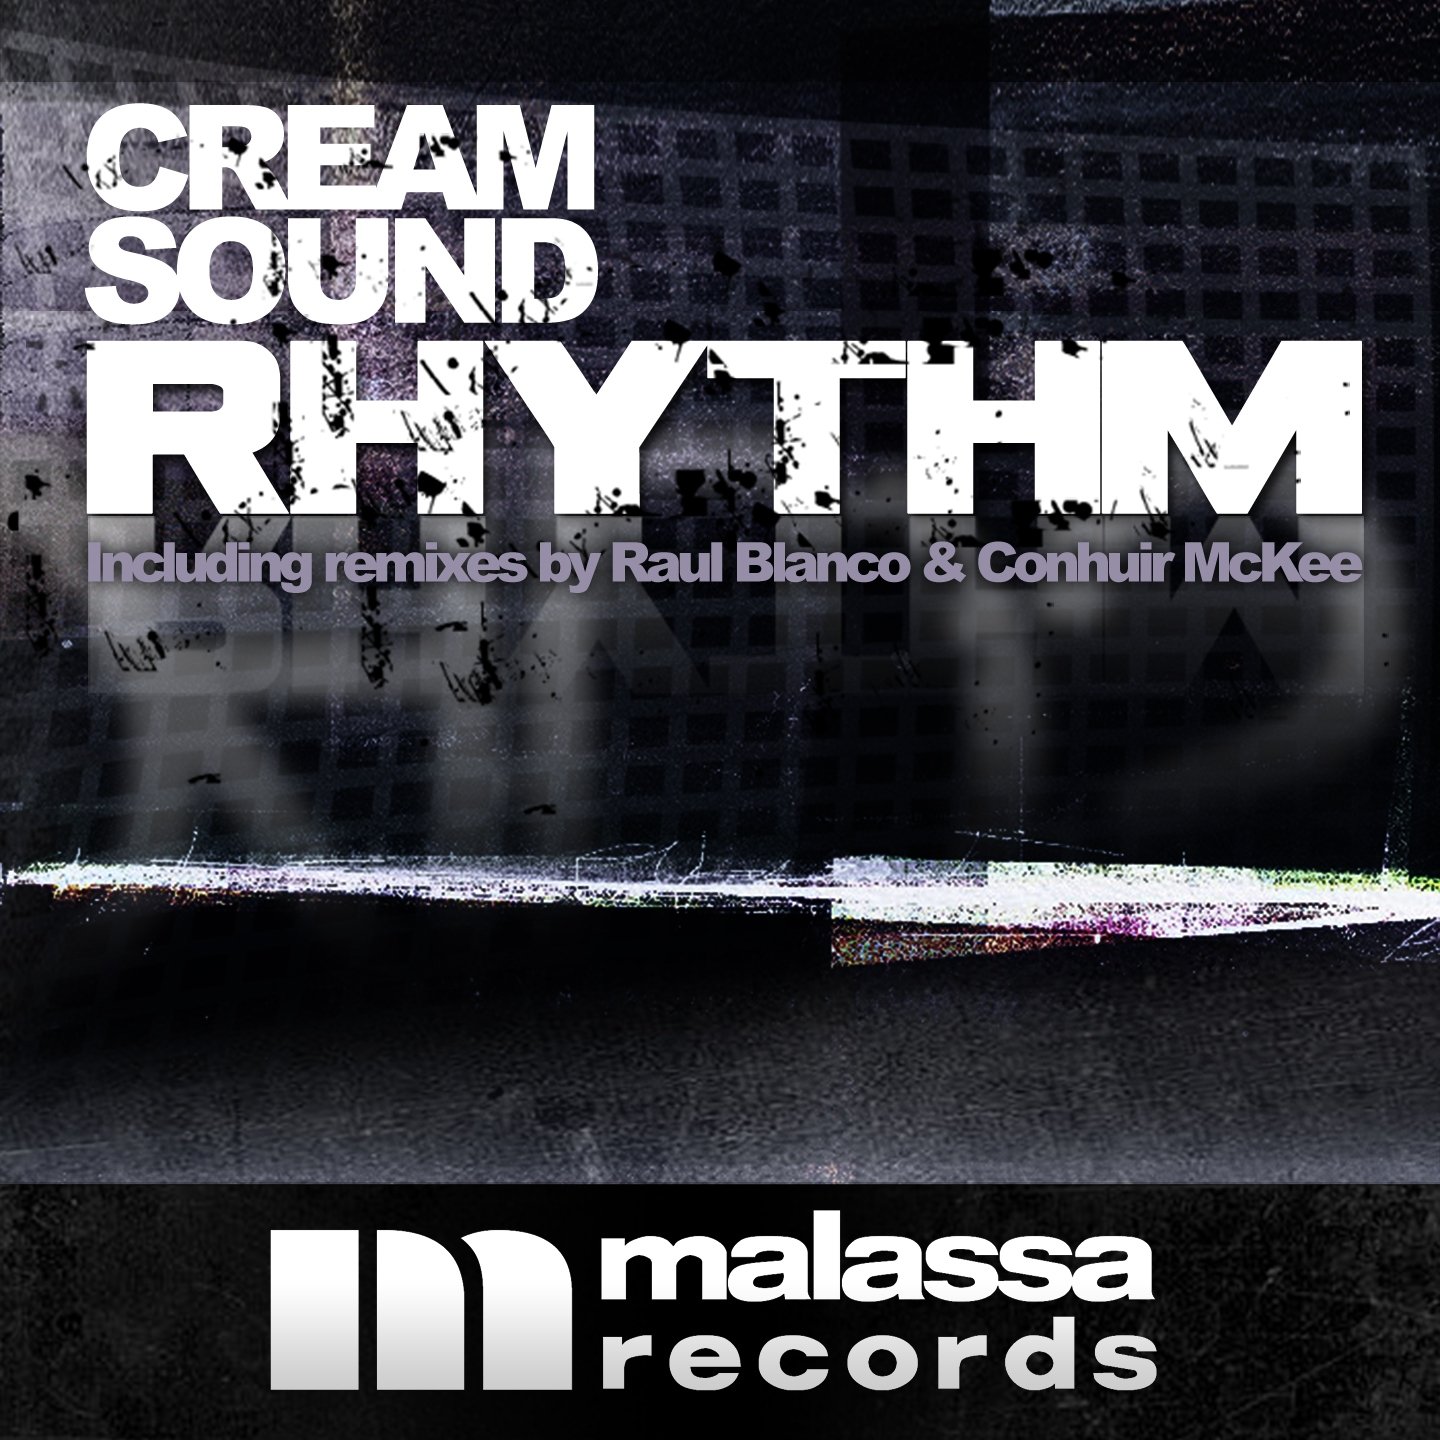 Cream Sound the Rhythm. Rhythm & Sound Rhythm & Sound. Rhythmic Sounds. Rhythm & Sound never tell you. Звук ласт